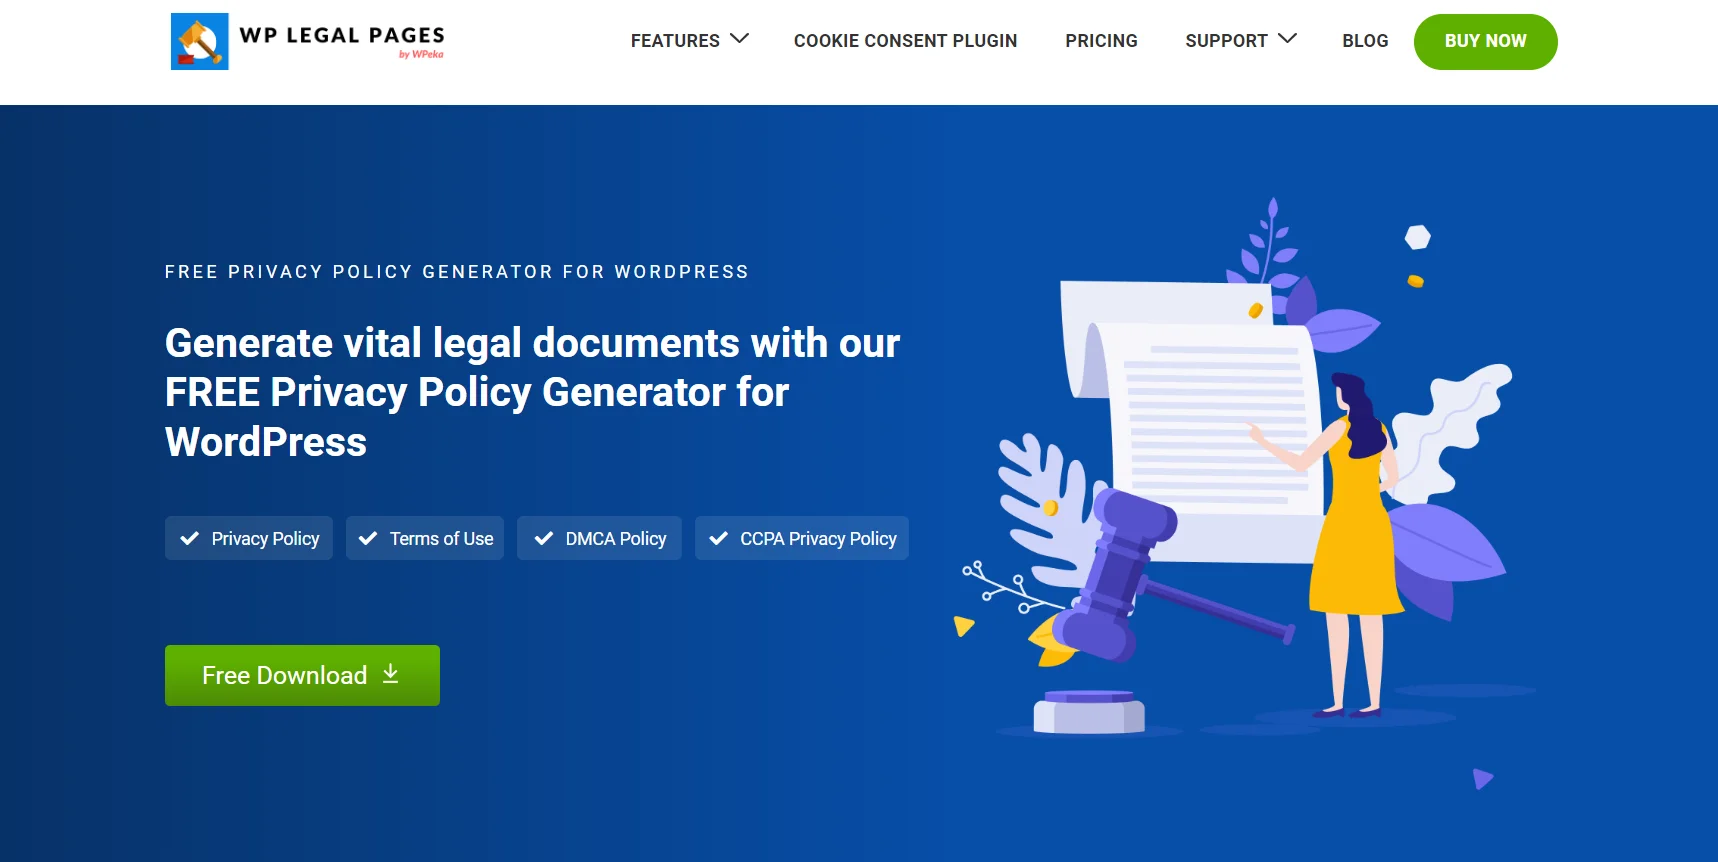 WP Legal Pages Plugin - eCommerce privacy policy